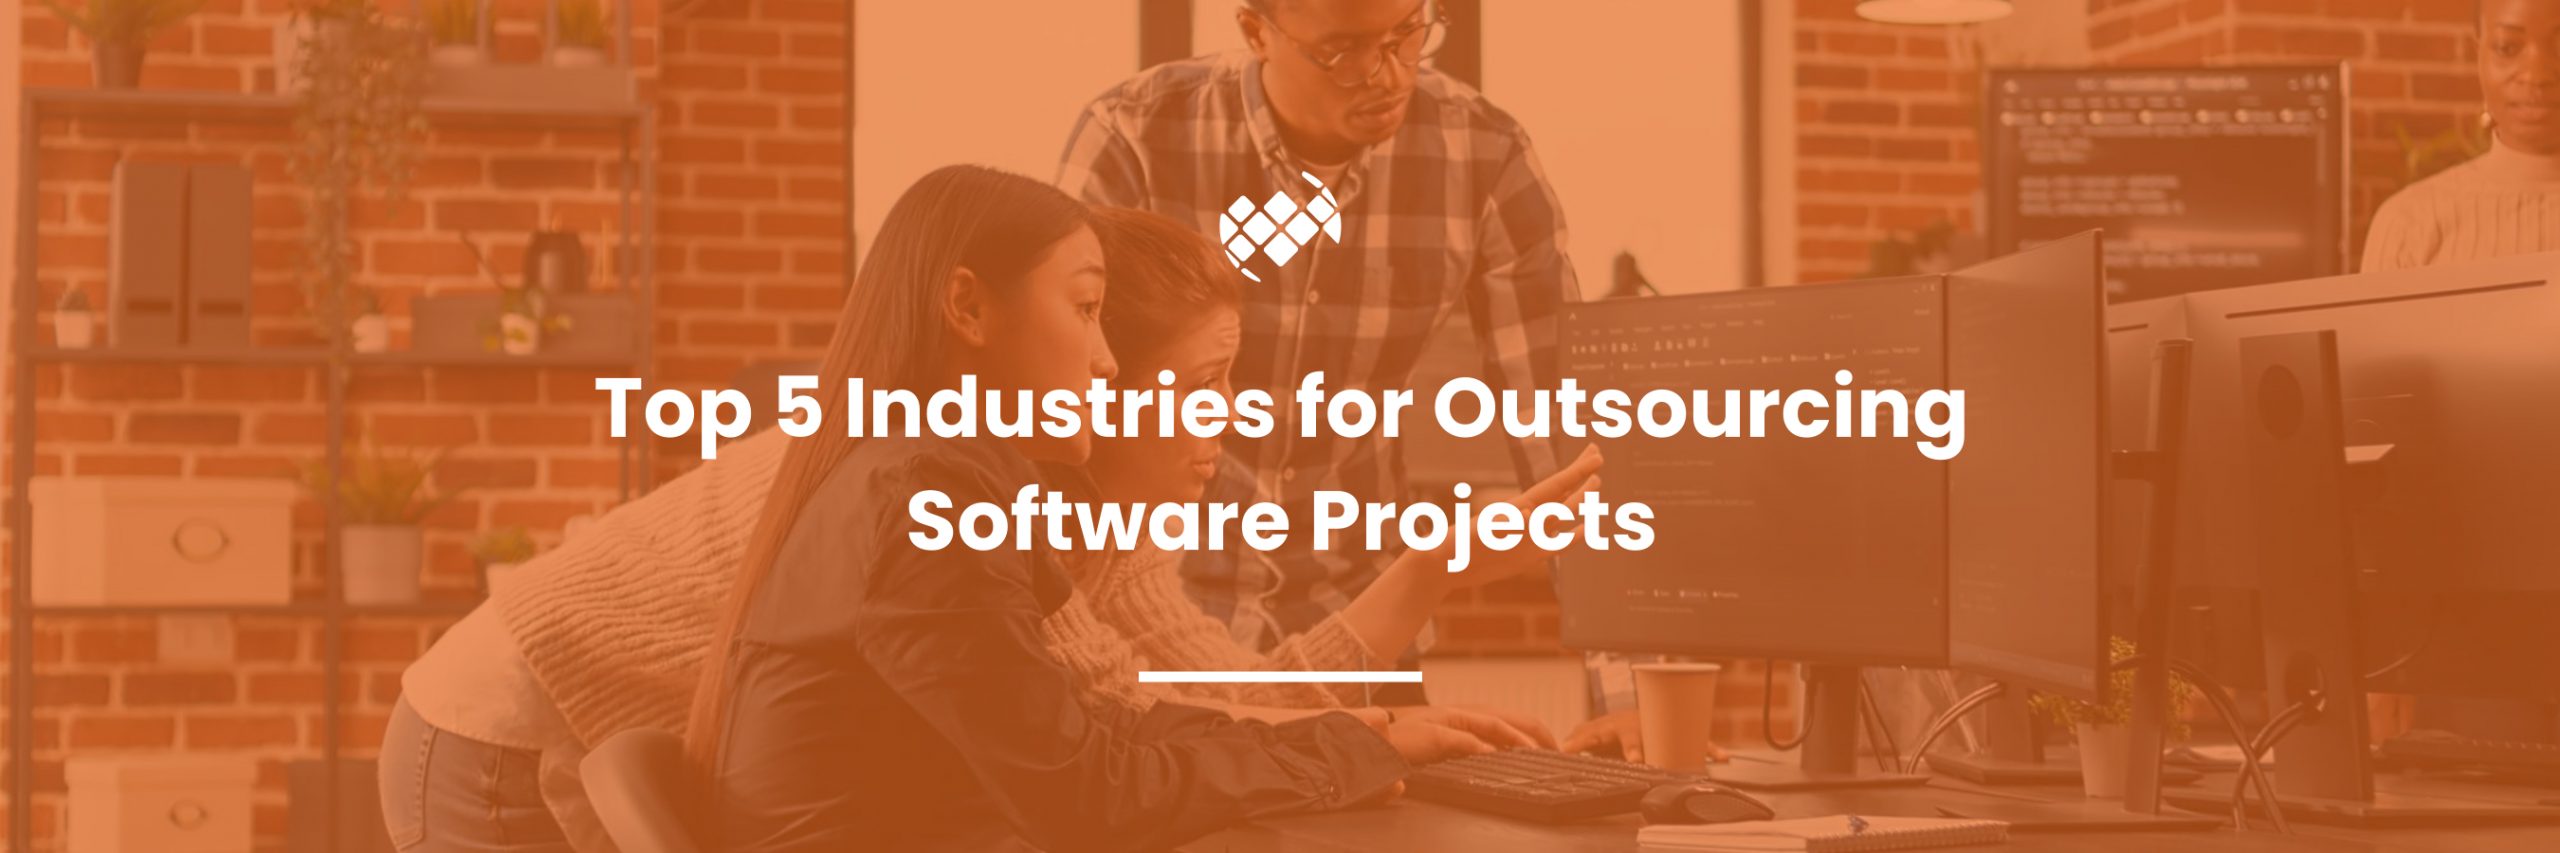  Outsourcing Software Projects